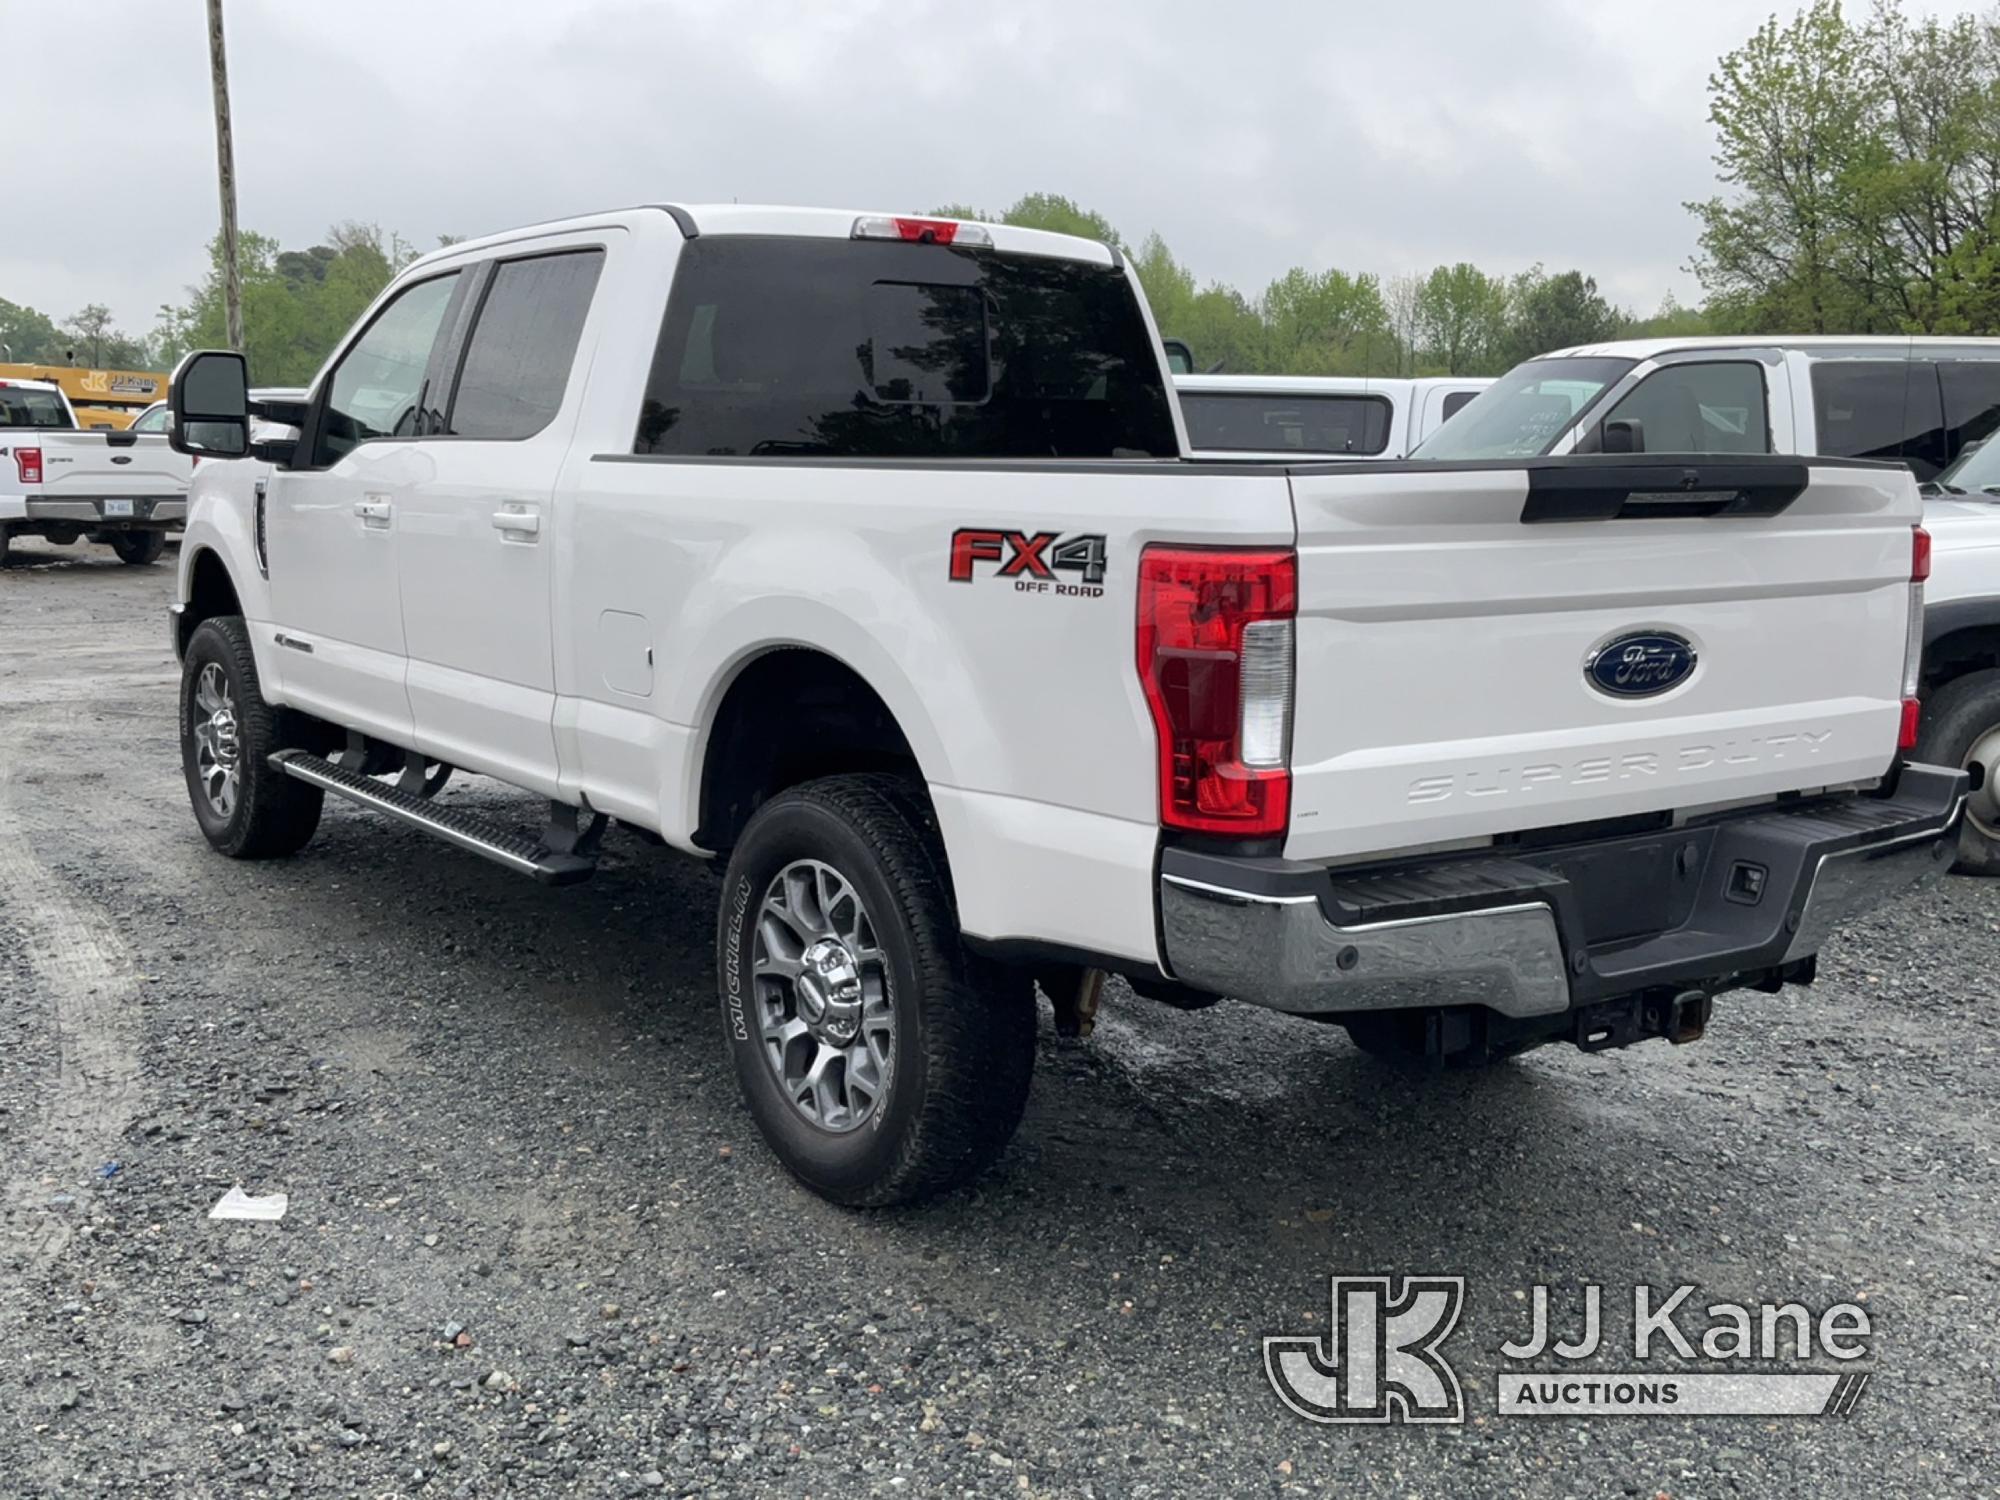 (Charlotte, NC) 2017 Ford F250 4x4 Crew-Cab Pickup Truck Runs & Moves) (Seller States: Intermittent